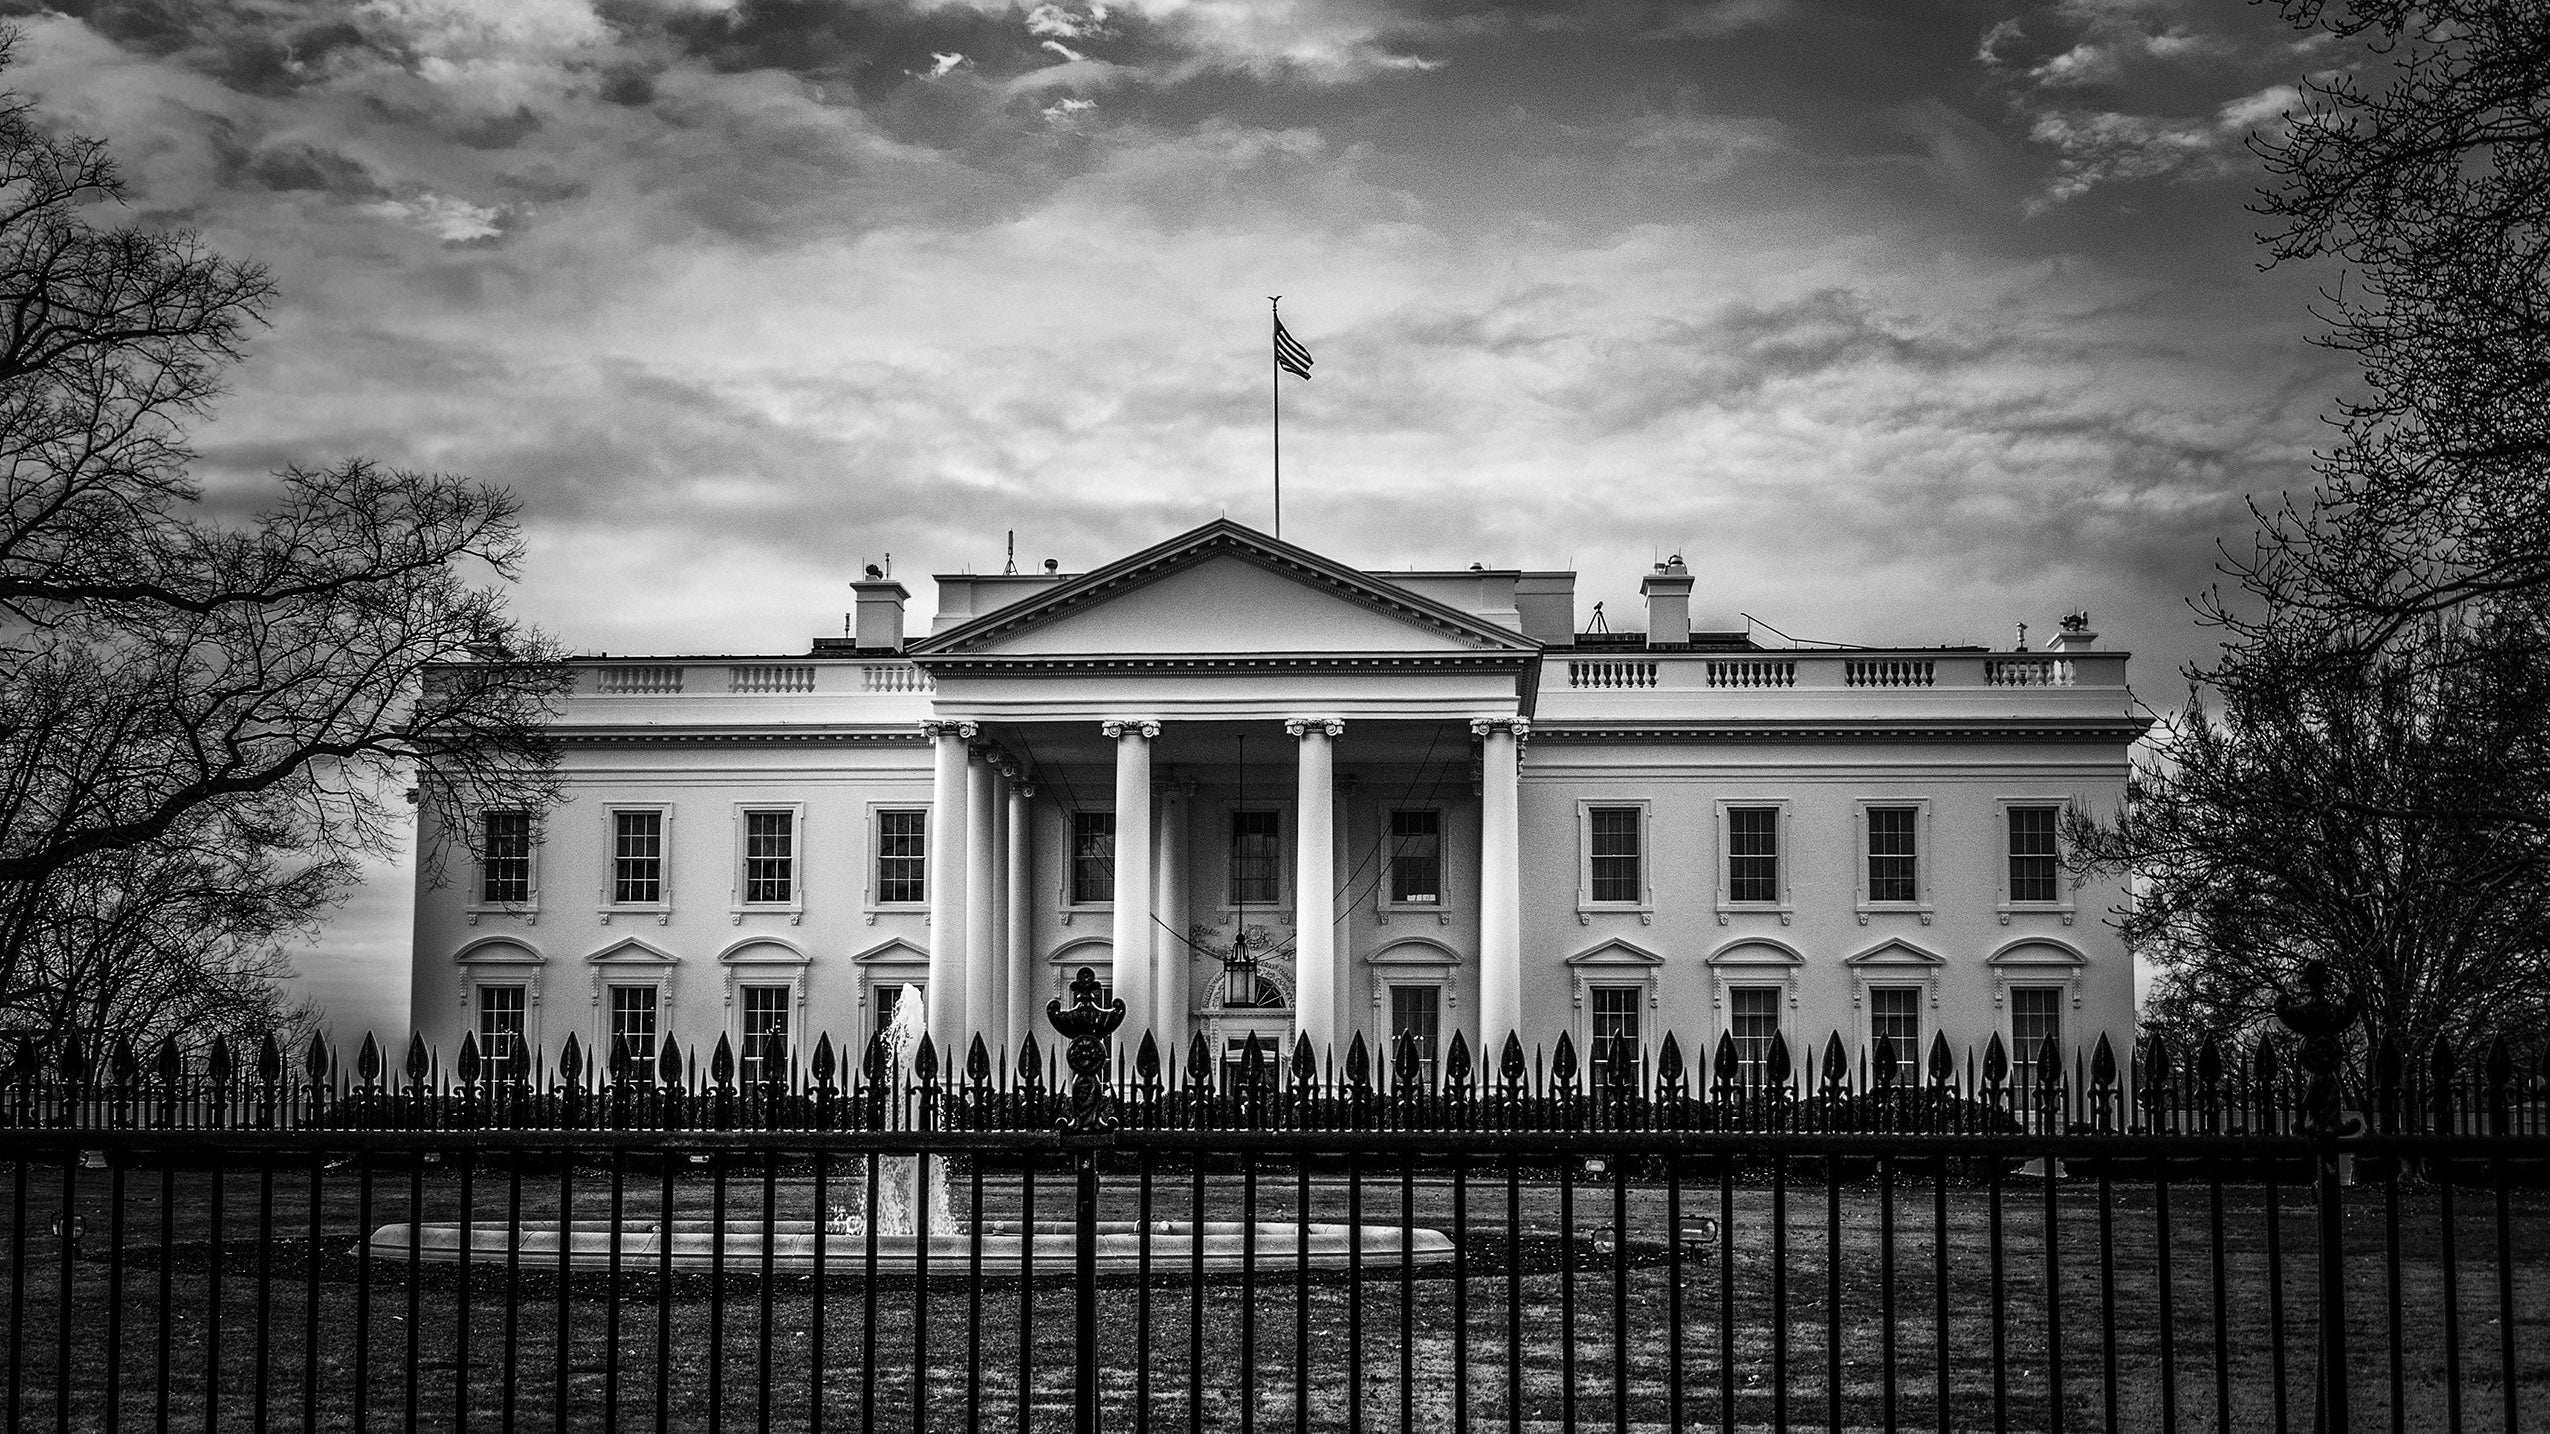 Black and white photo of the White House